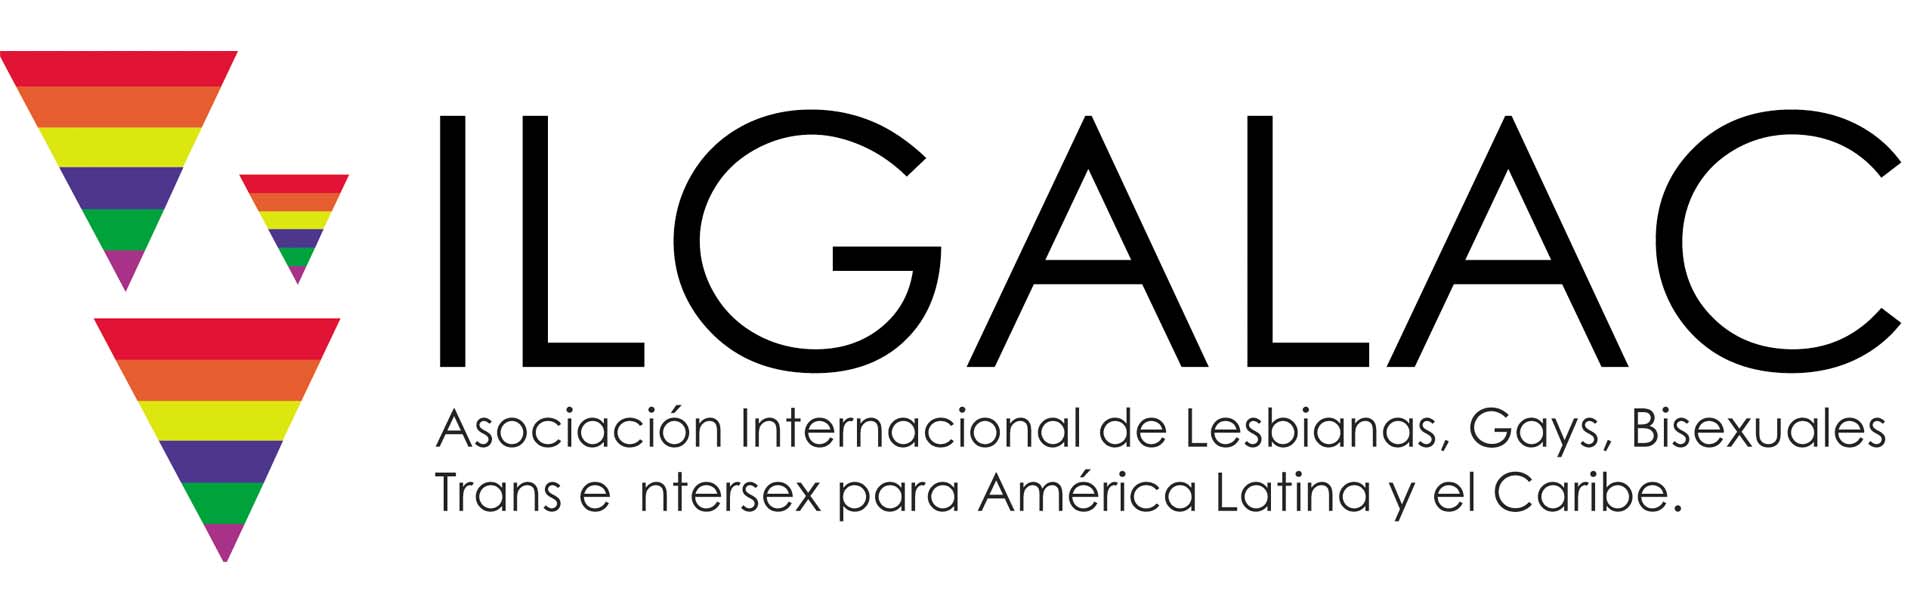 ILGALAC has acquired legal personality status in Argentina